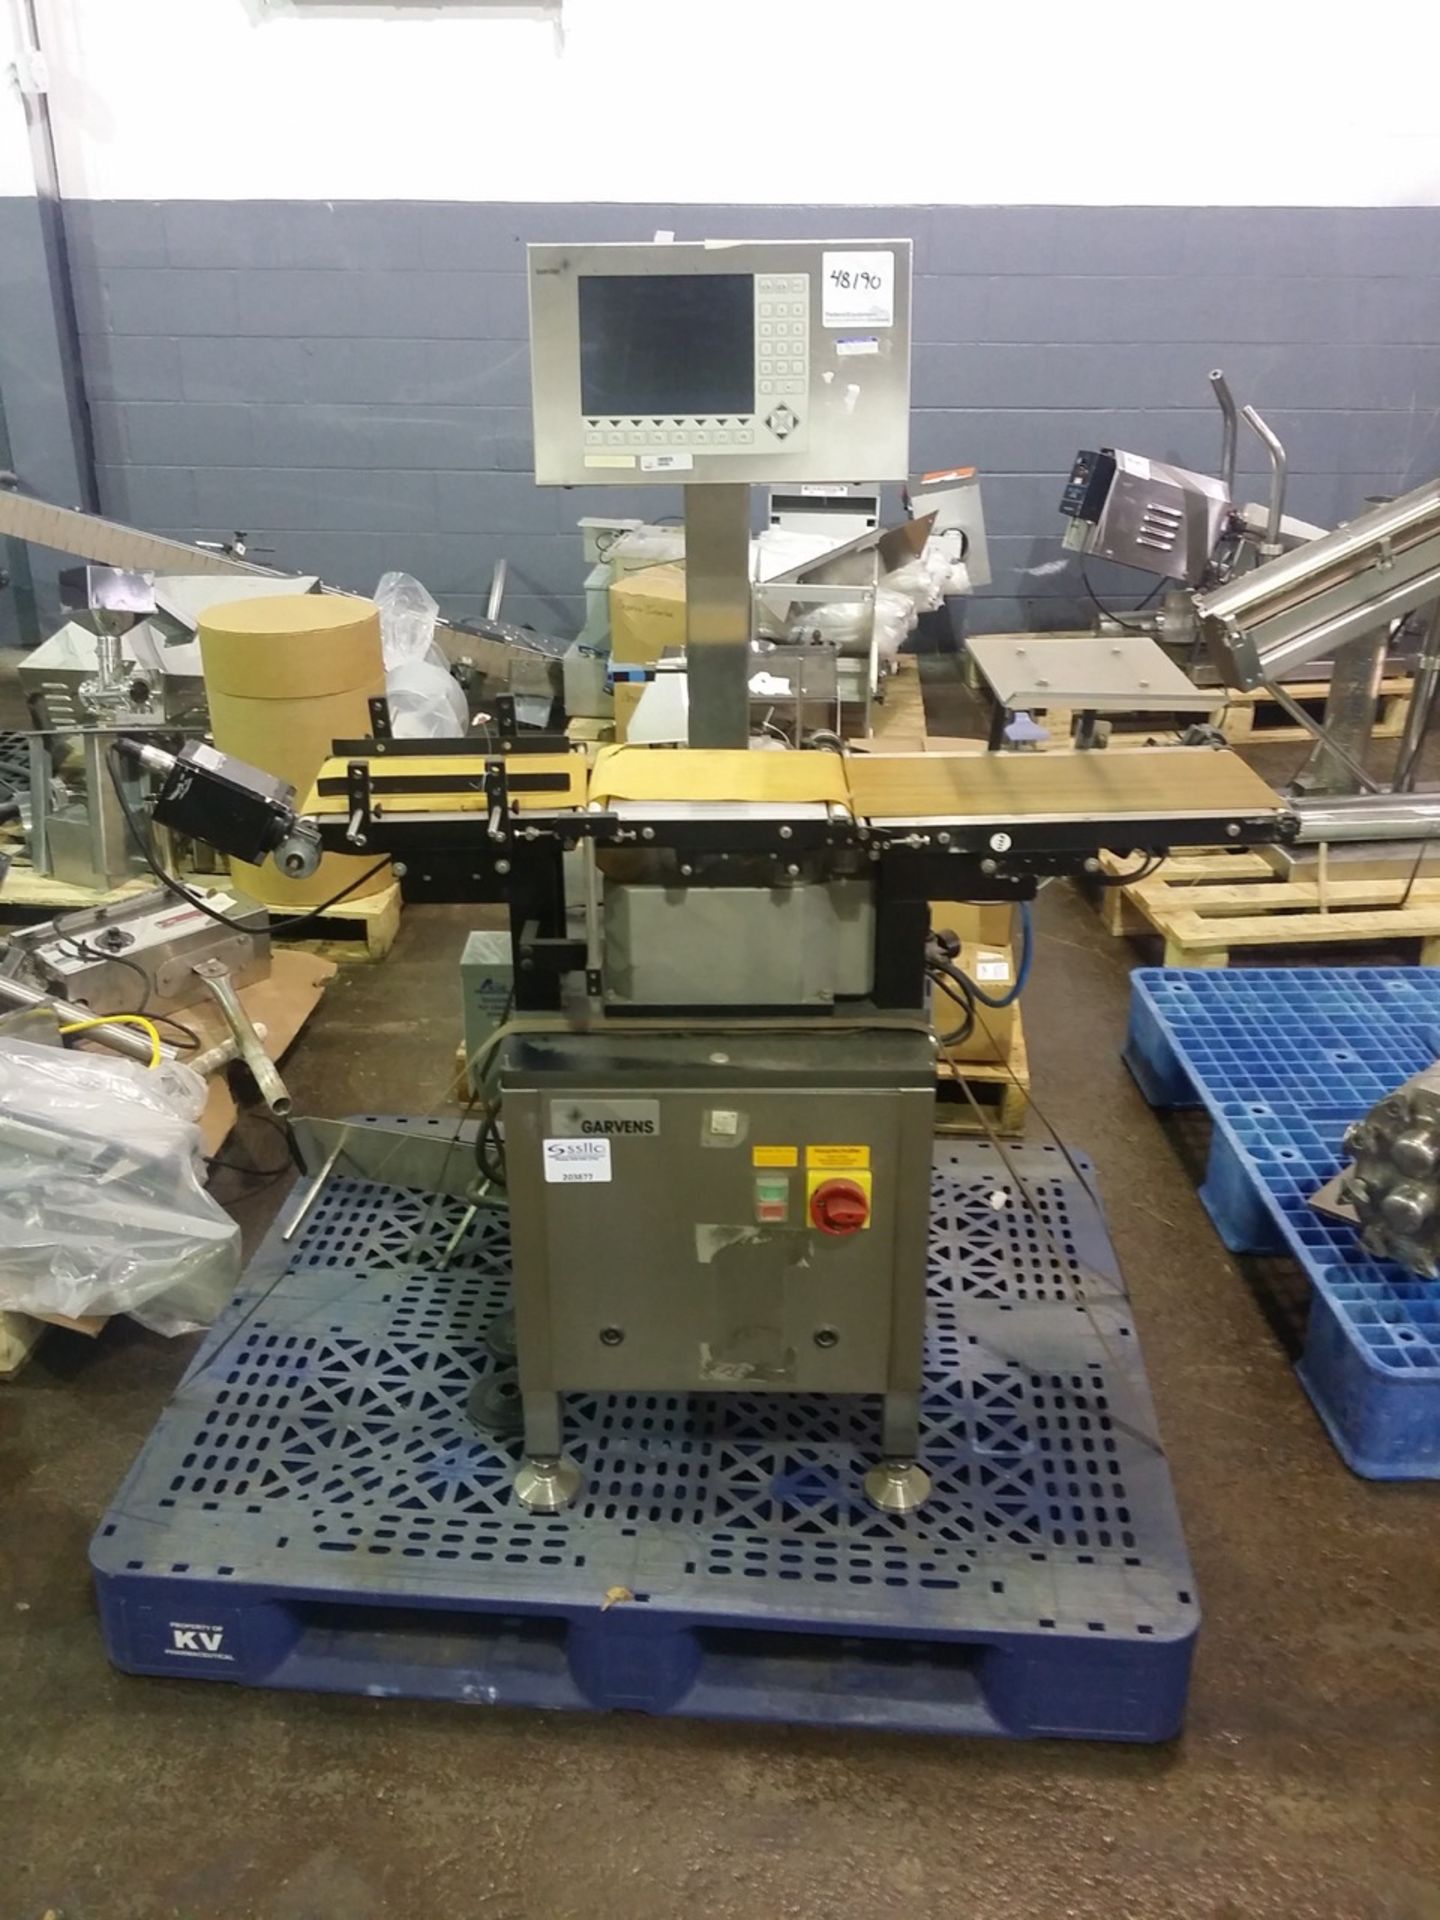 Garvens high speed checkweigher, type VL2, 9" x 9" load cell area, 600 g capacity, serial# 120180.